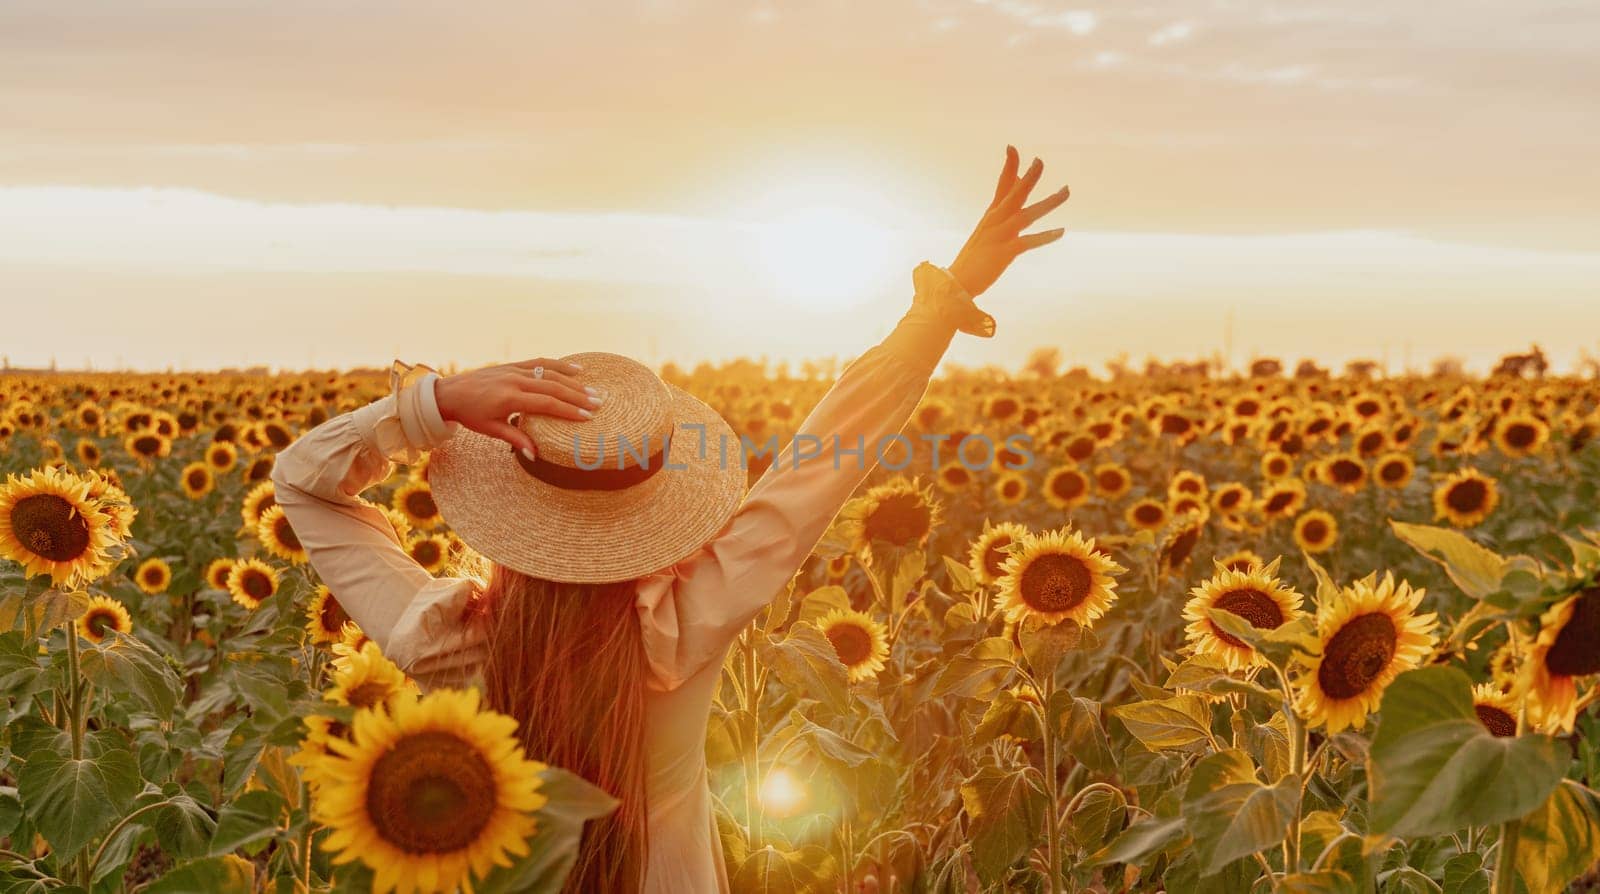 Woman in the sunflowers field. Summer time. Young beautiful woman standing in sunflower field.